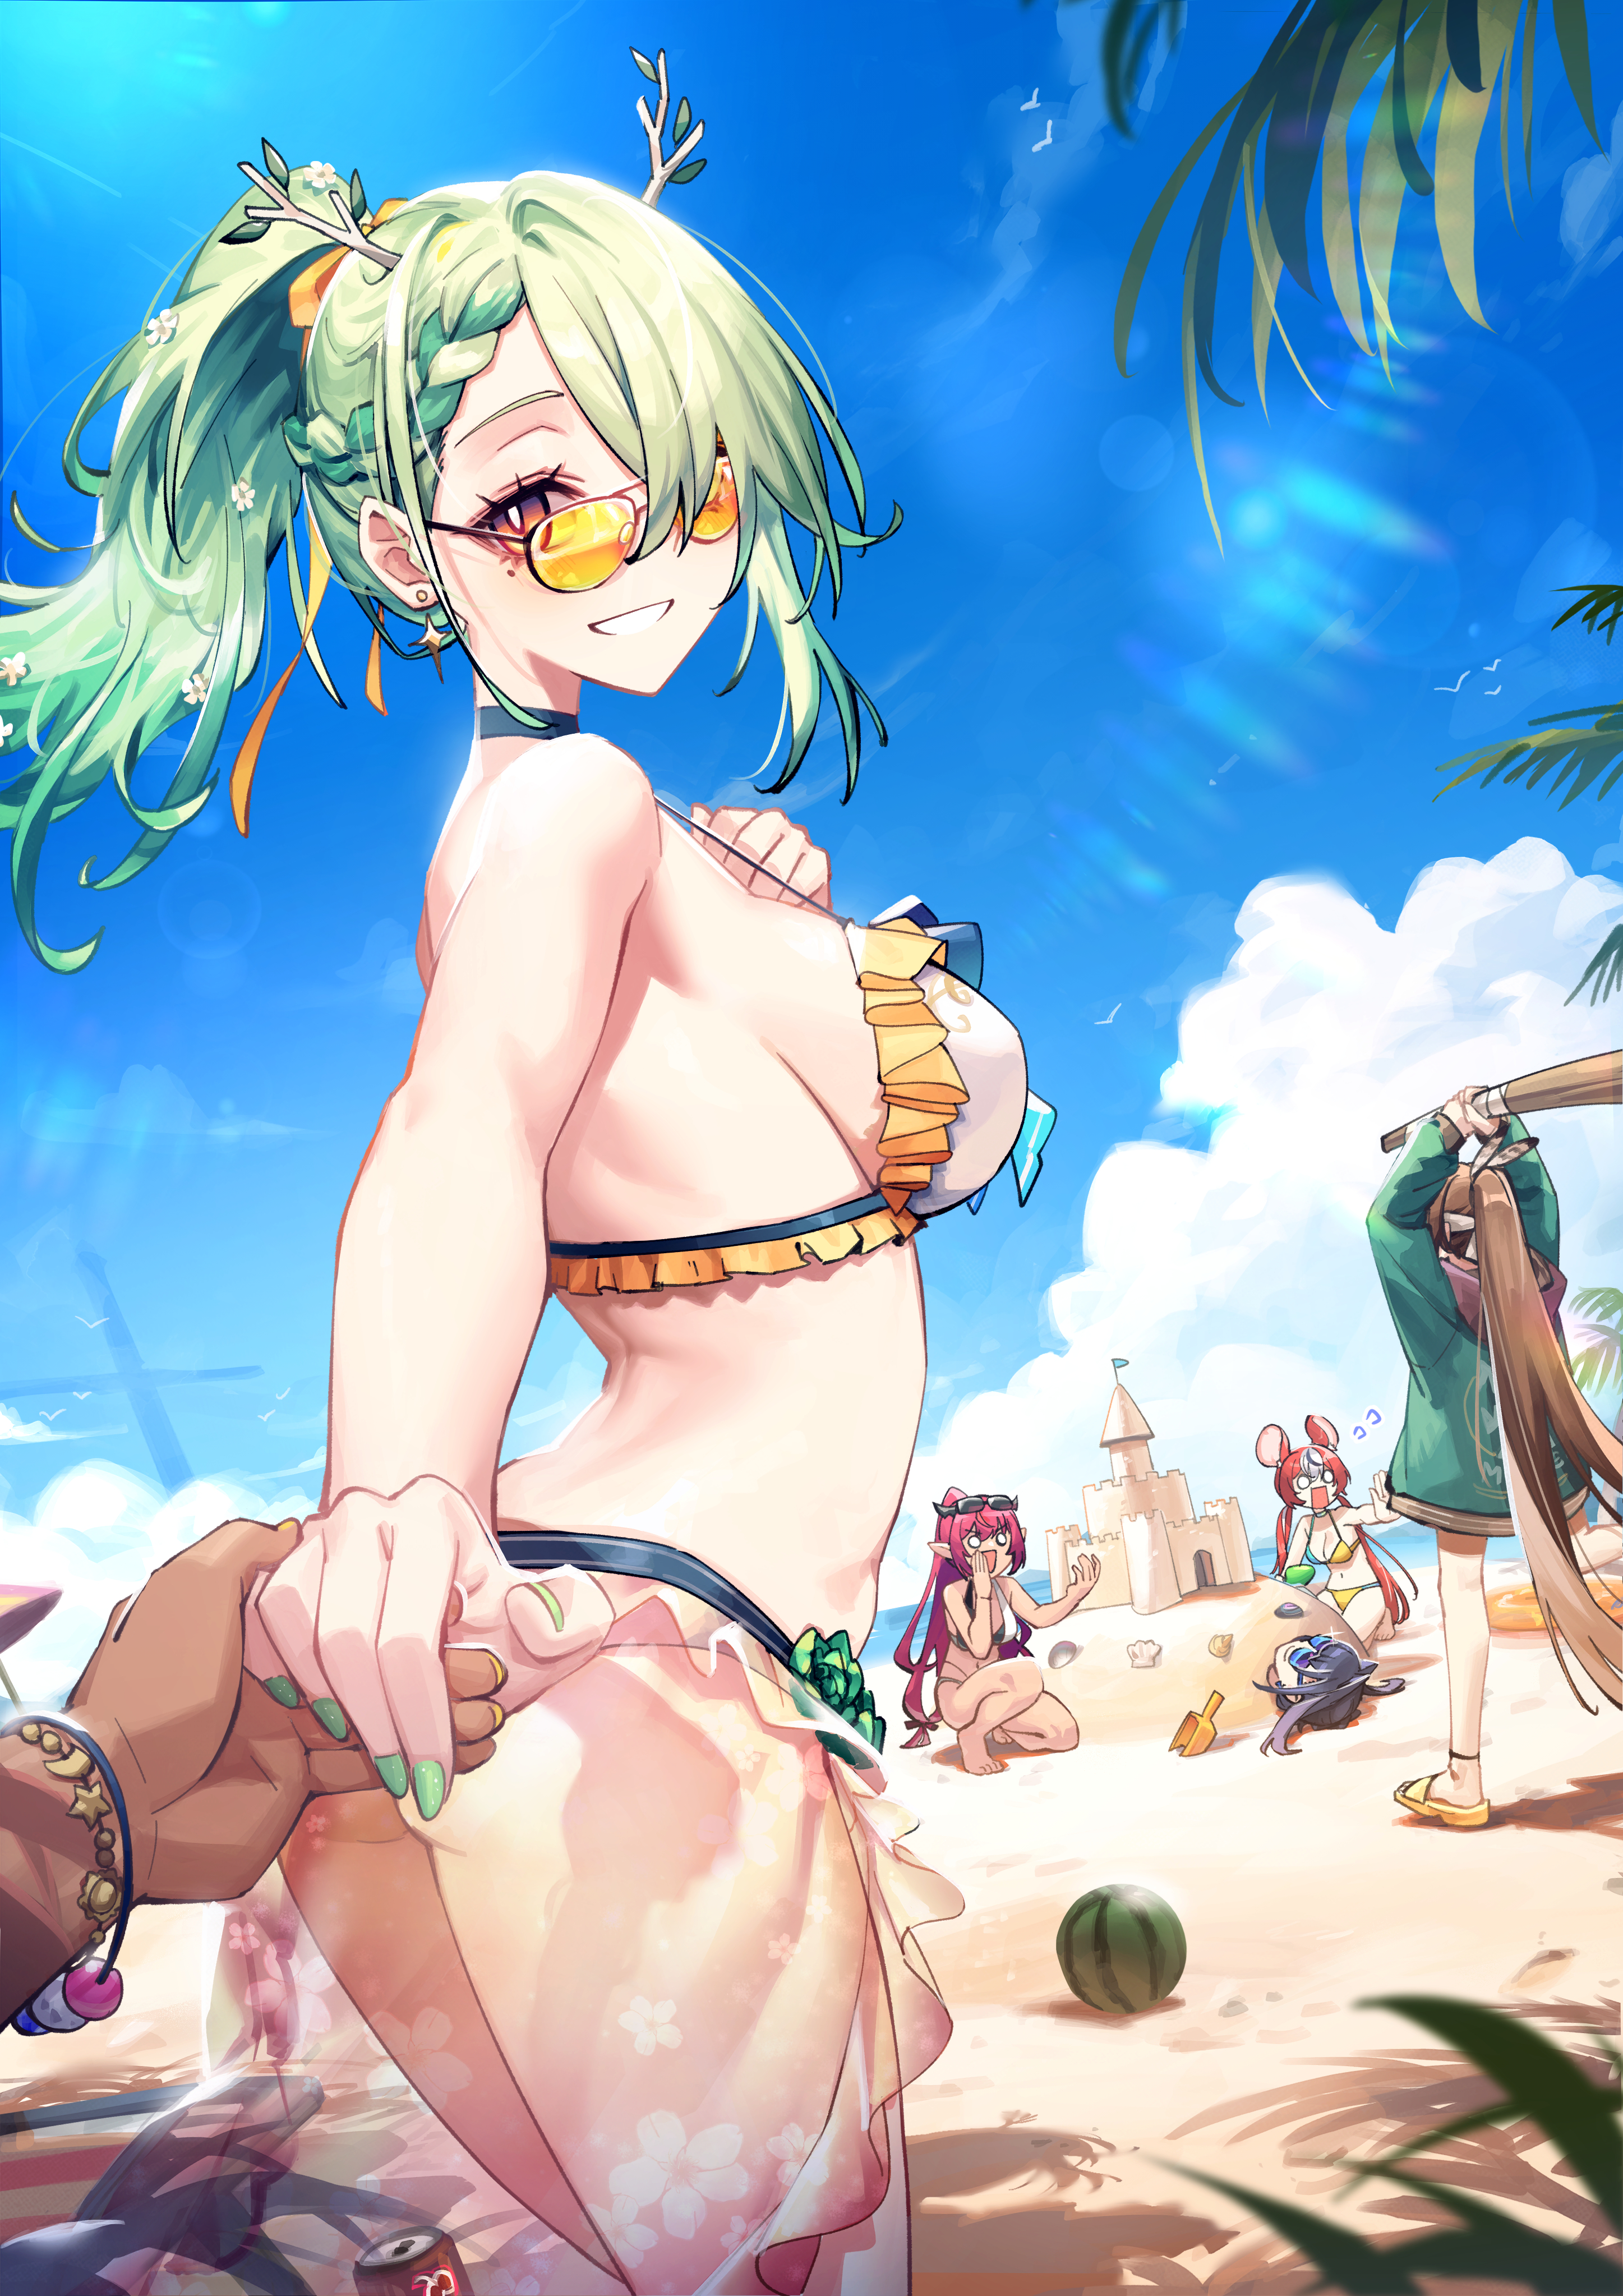 Anime 2894x4093 Adarin Hololive English Hololive Ceres Fauna Hakos Baelz beach IRyS (Hololive) bikini Nanashi Mumei boobs Ouro Kronii Tsukumo Sana group of women clouds women on beach sky women outdoors portrait display POV looking at viewer fruit watermelons choker sideboob long hair sunglasses glasses sand sculpture sand castle looking back smiling green hair ponytail mole under eye brunette yellow bikini sunlight green nails bracelets palm trees leaves flower in hair humor flowers anime girls butt crack hand(s) on chest sand braids holding hands moles Virtual Youtuber